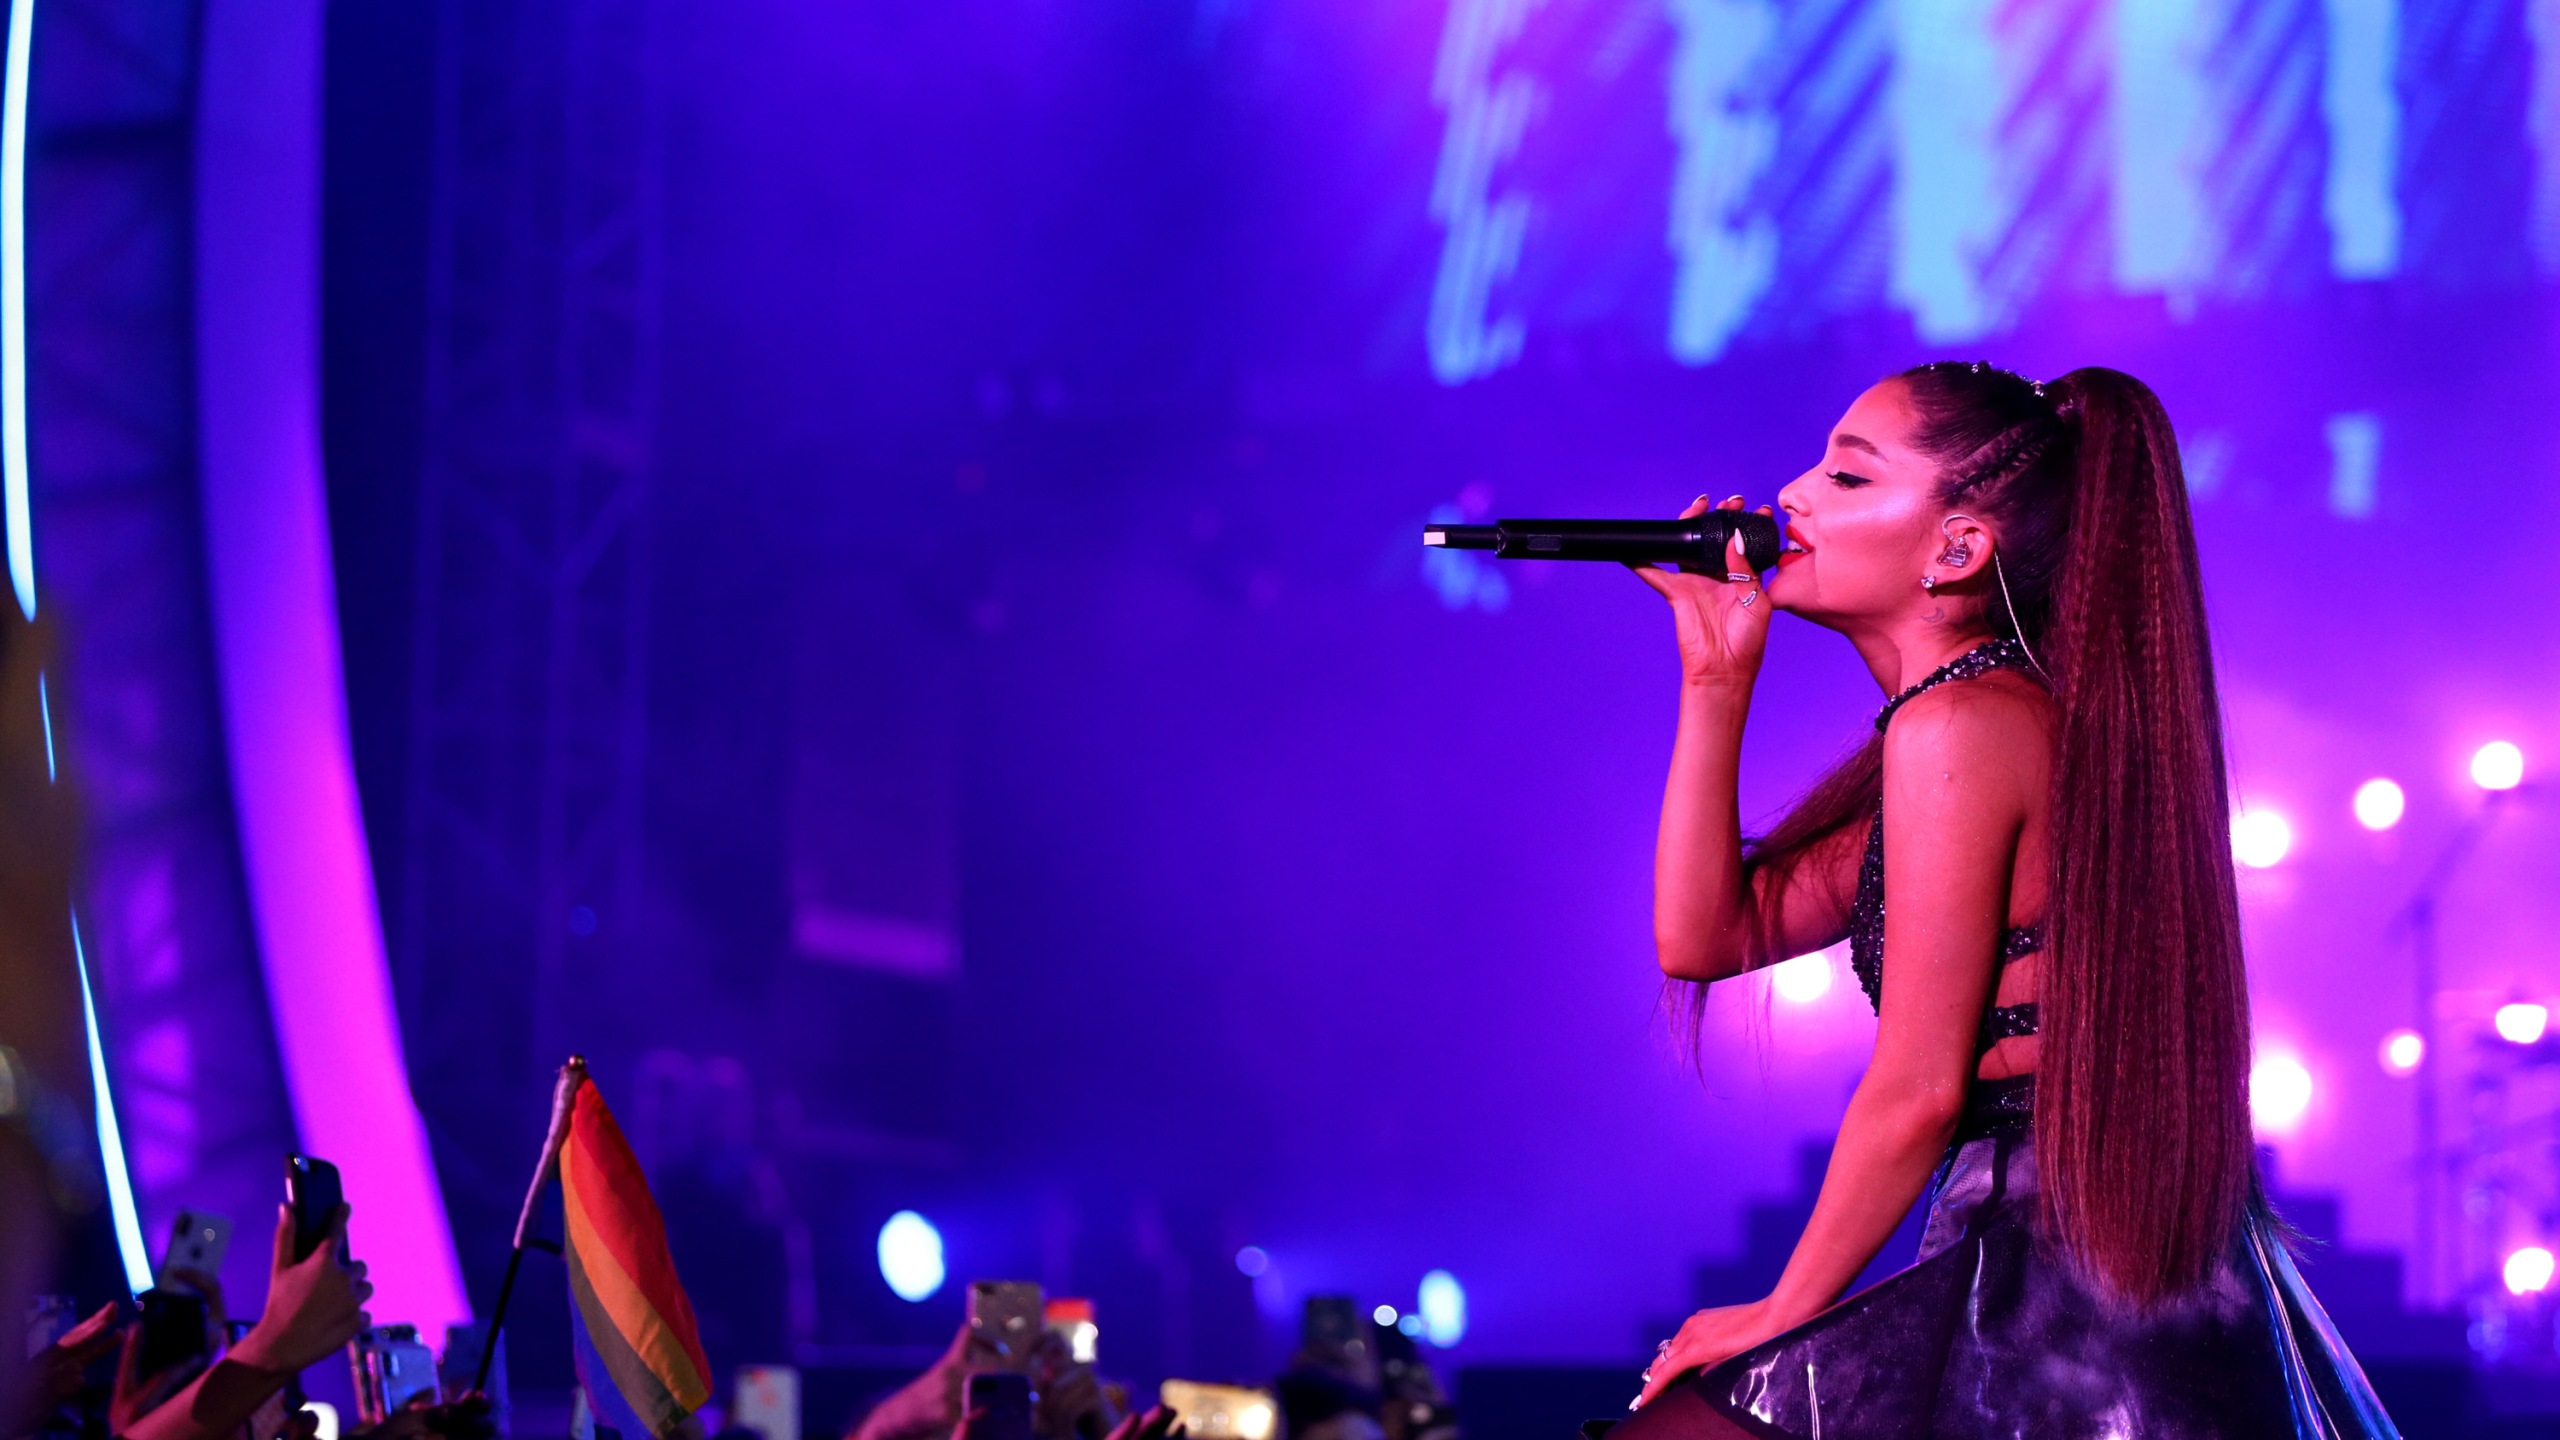 Ariana Grande's concert at Bankers Life Fieldhouse rescheduled for June 29